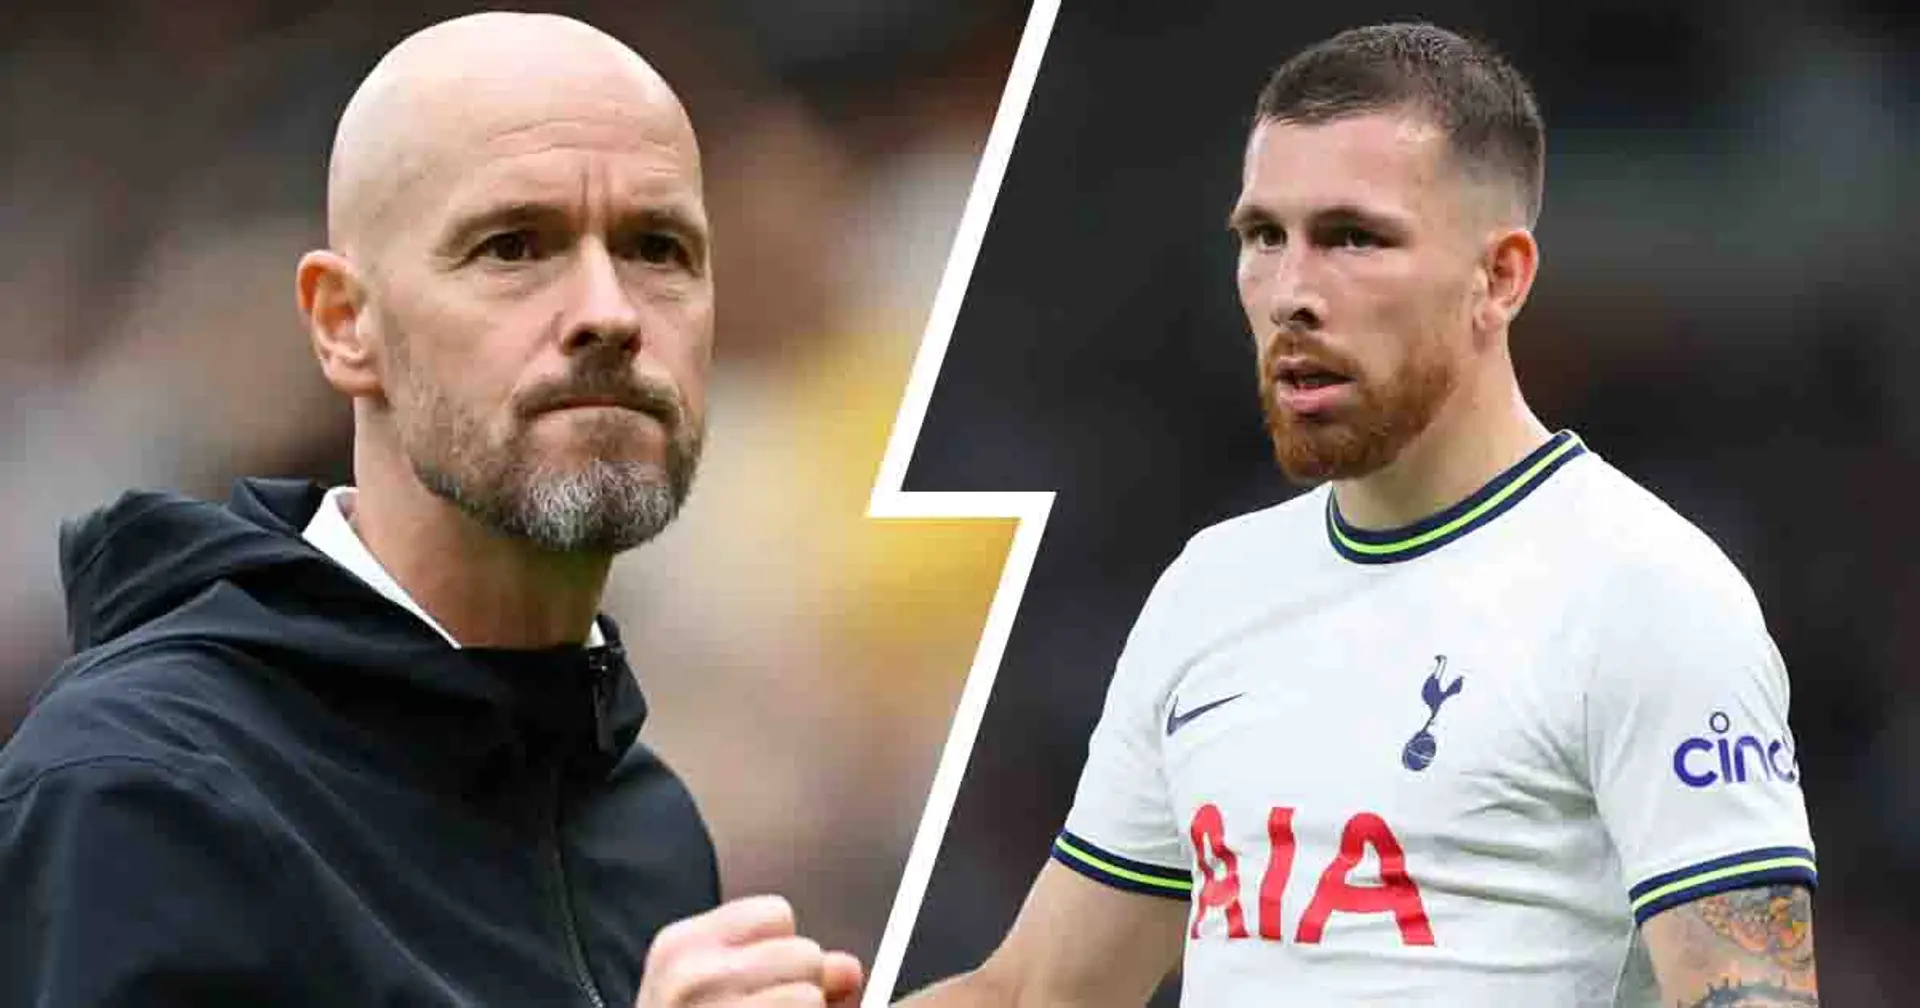 Man United considering late move for Pierre-Emile Hojbjerg, Tottenham stance revealed (reliability: 4 stars)